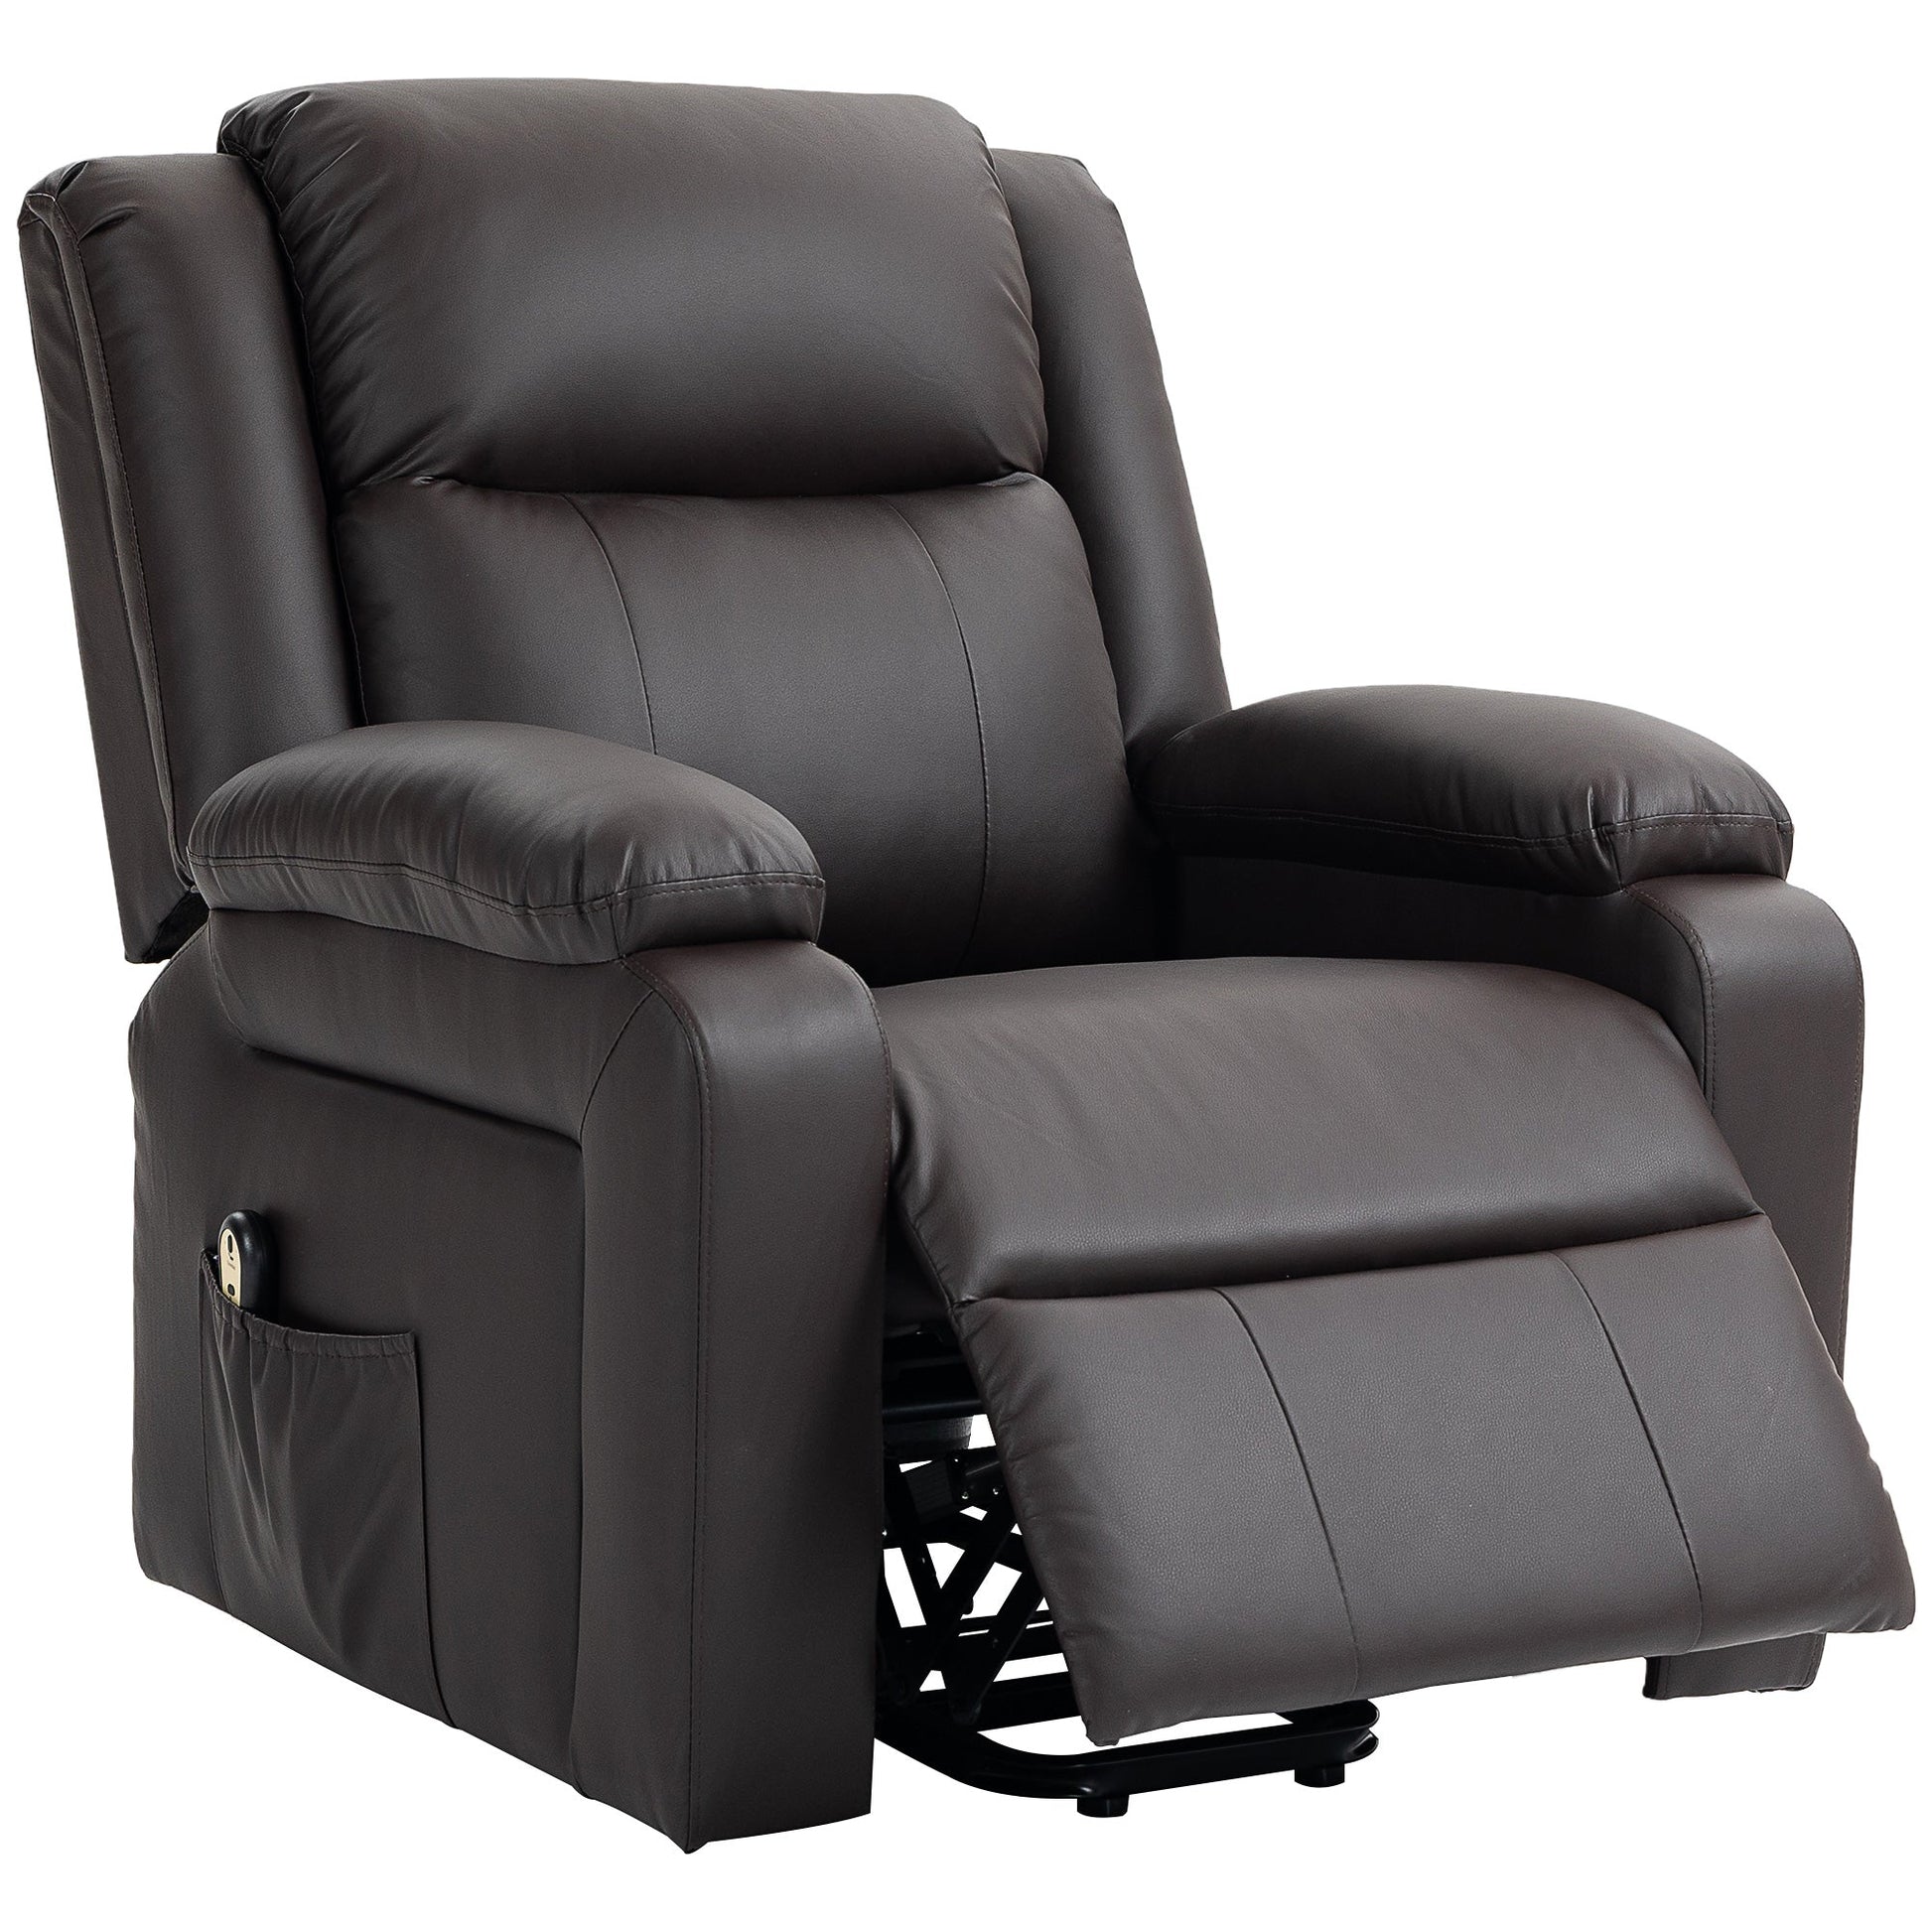 Lift Chair for Seniors, PU Leather Upholstered Electric Recliner Chair with Remote, Side Pockets, Quick Assembly, Brown at Gallery Canada